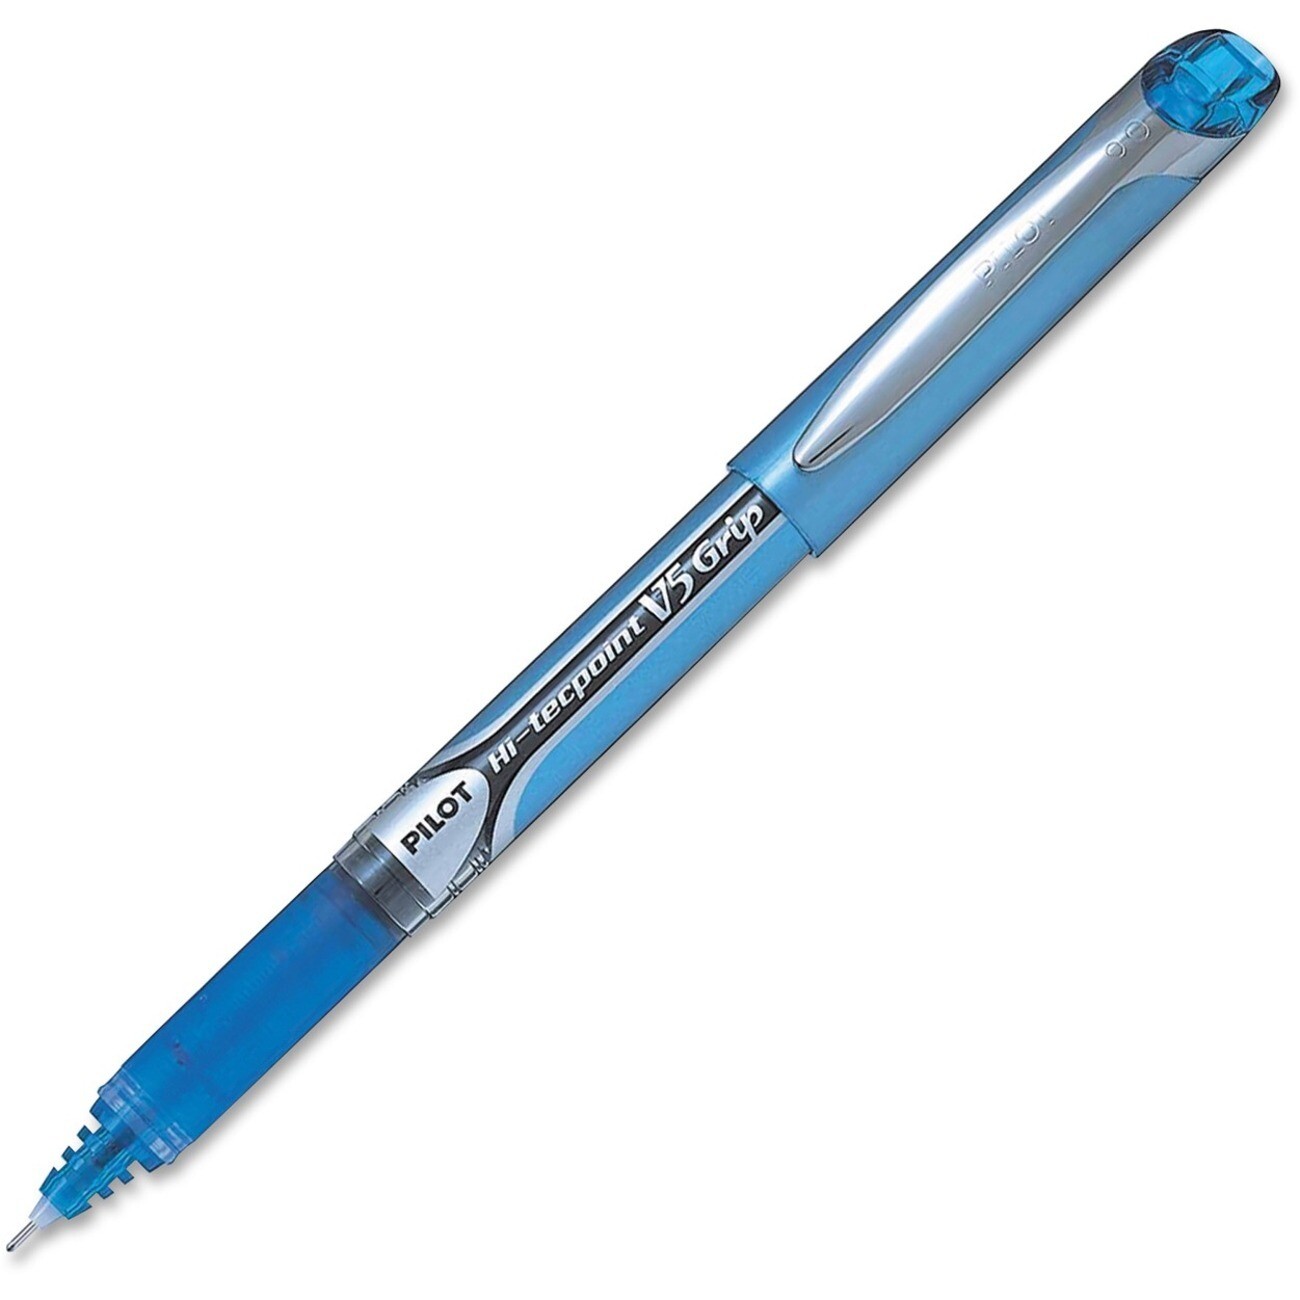 Pen, Needle Point Rollerball, Hi-Tecpoint V5 Turquoise, Single, 0.5 Mm